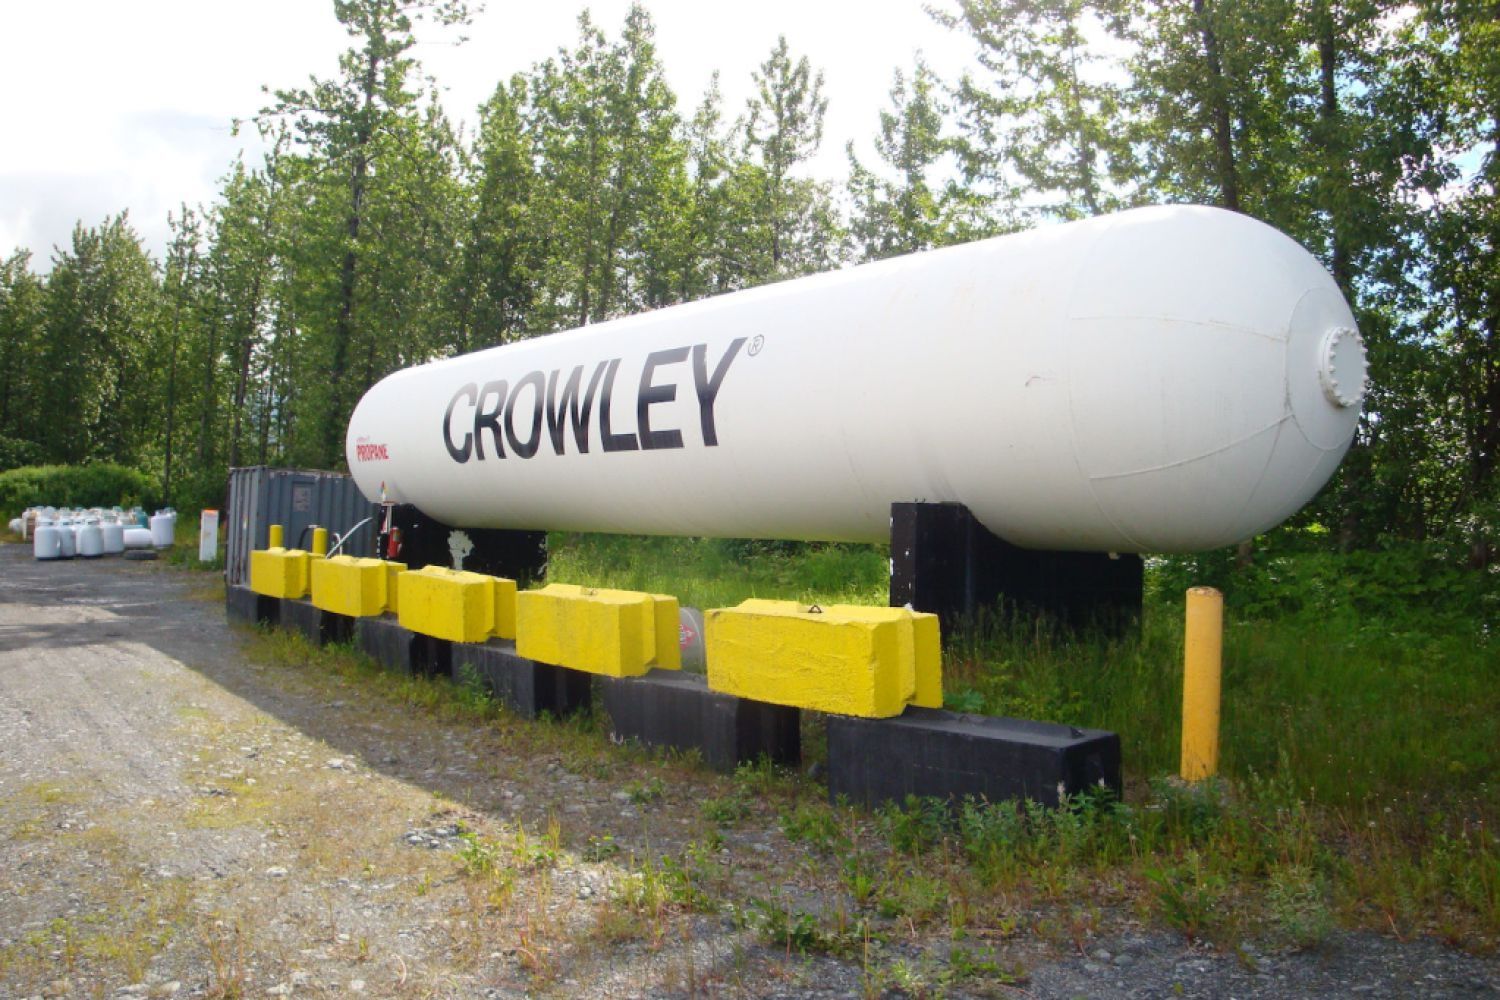 crowley fuels commercial fuels featured